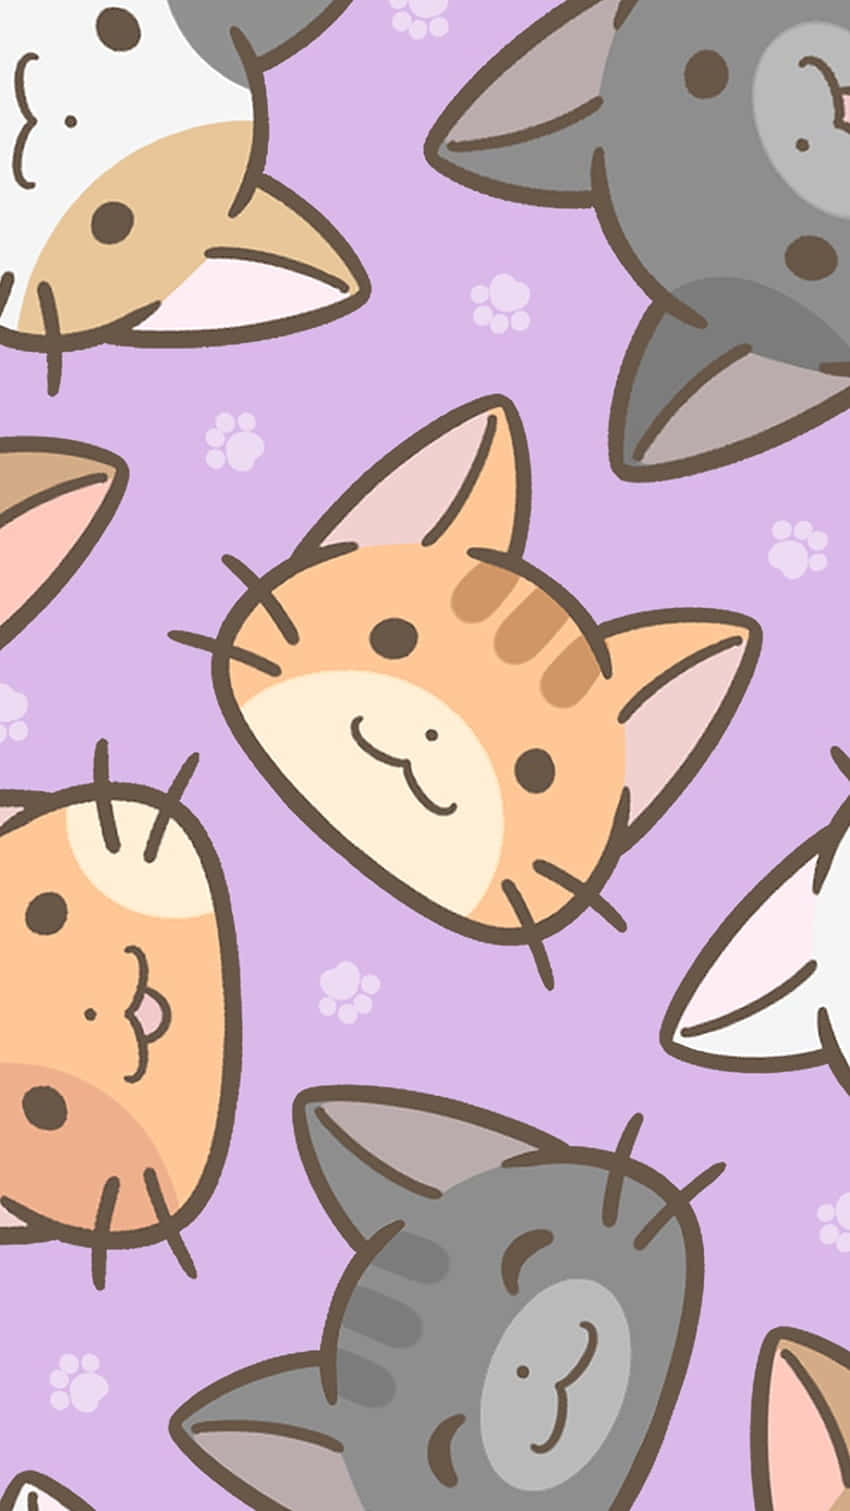 A sweet and playful pattern featuring a cute cat! Wallpaper